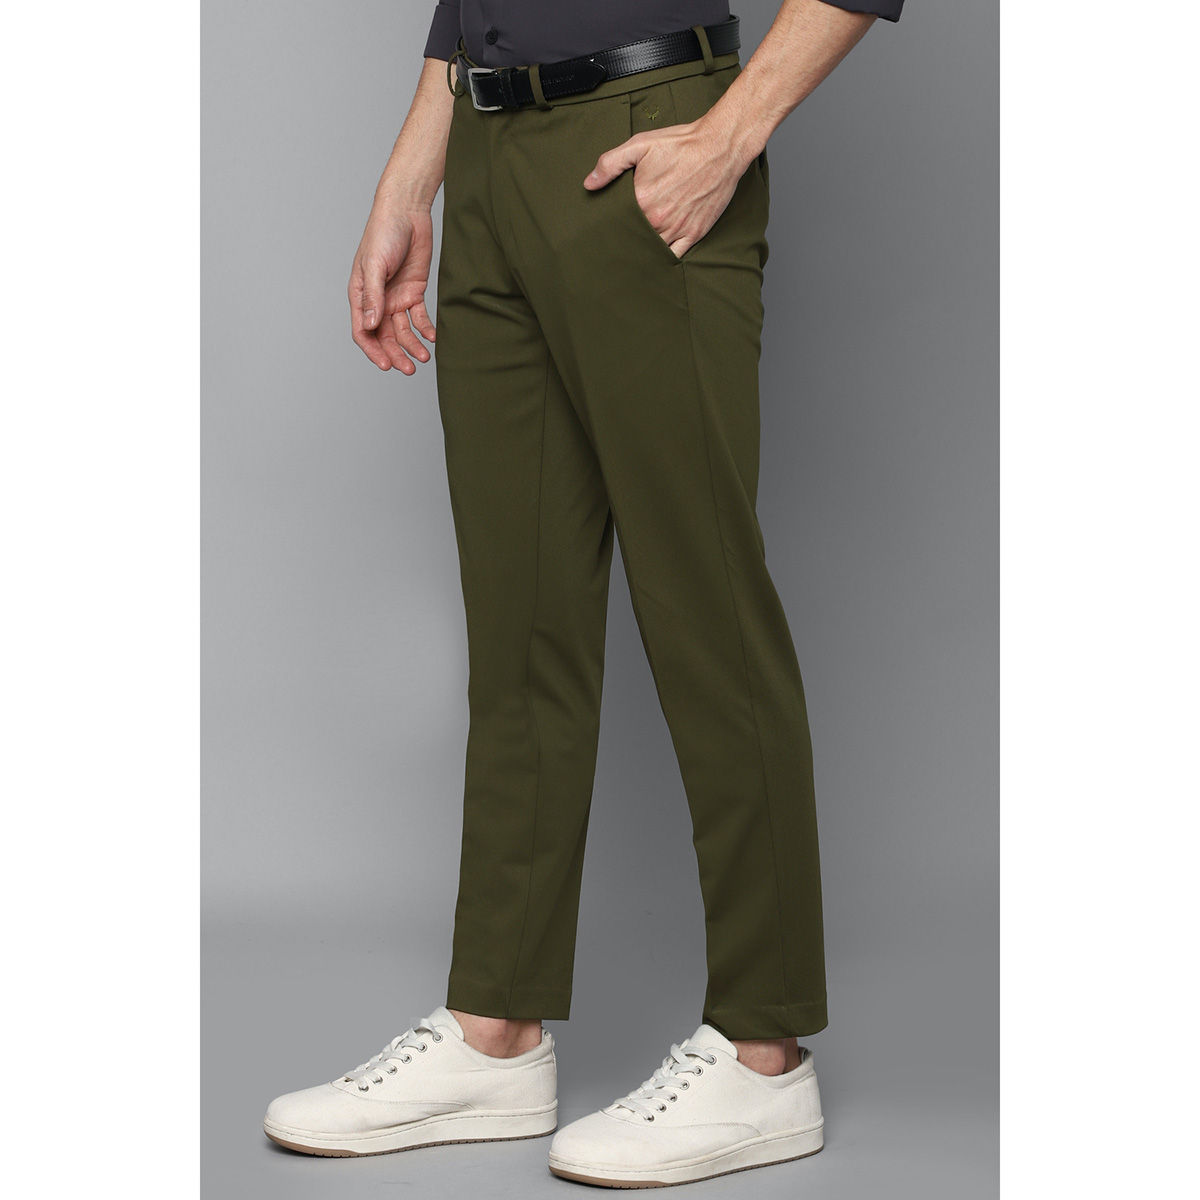 Buy Allen Solly Solid Cotton Stretch Slim Fit Men's Casual Trousers (Beige,  Size_38) at Amazon.in